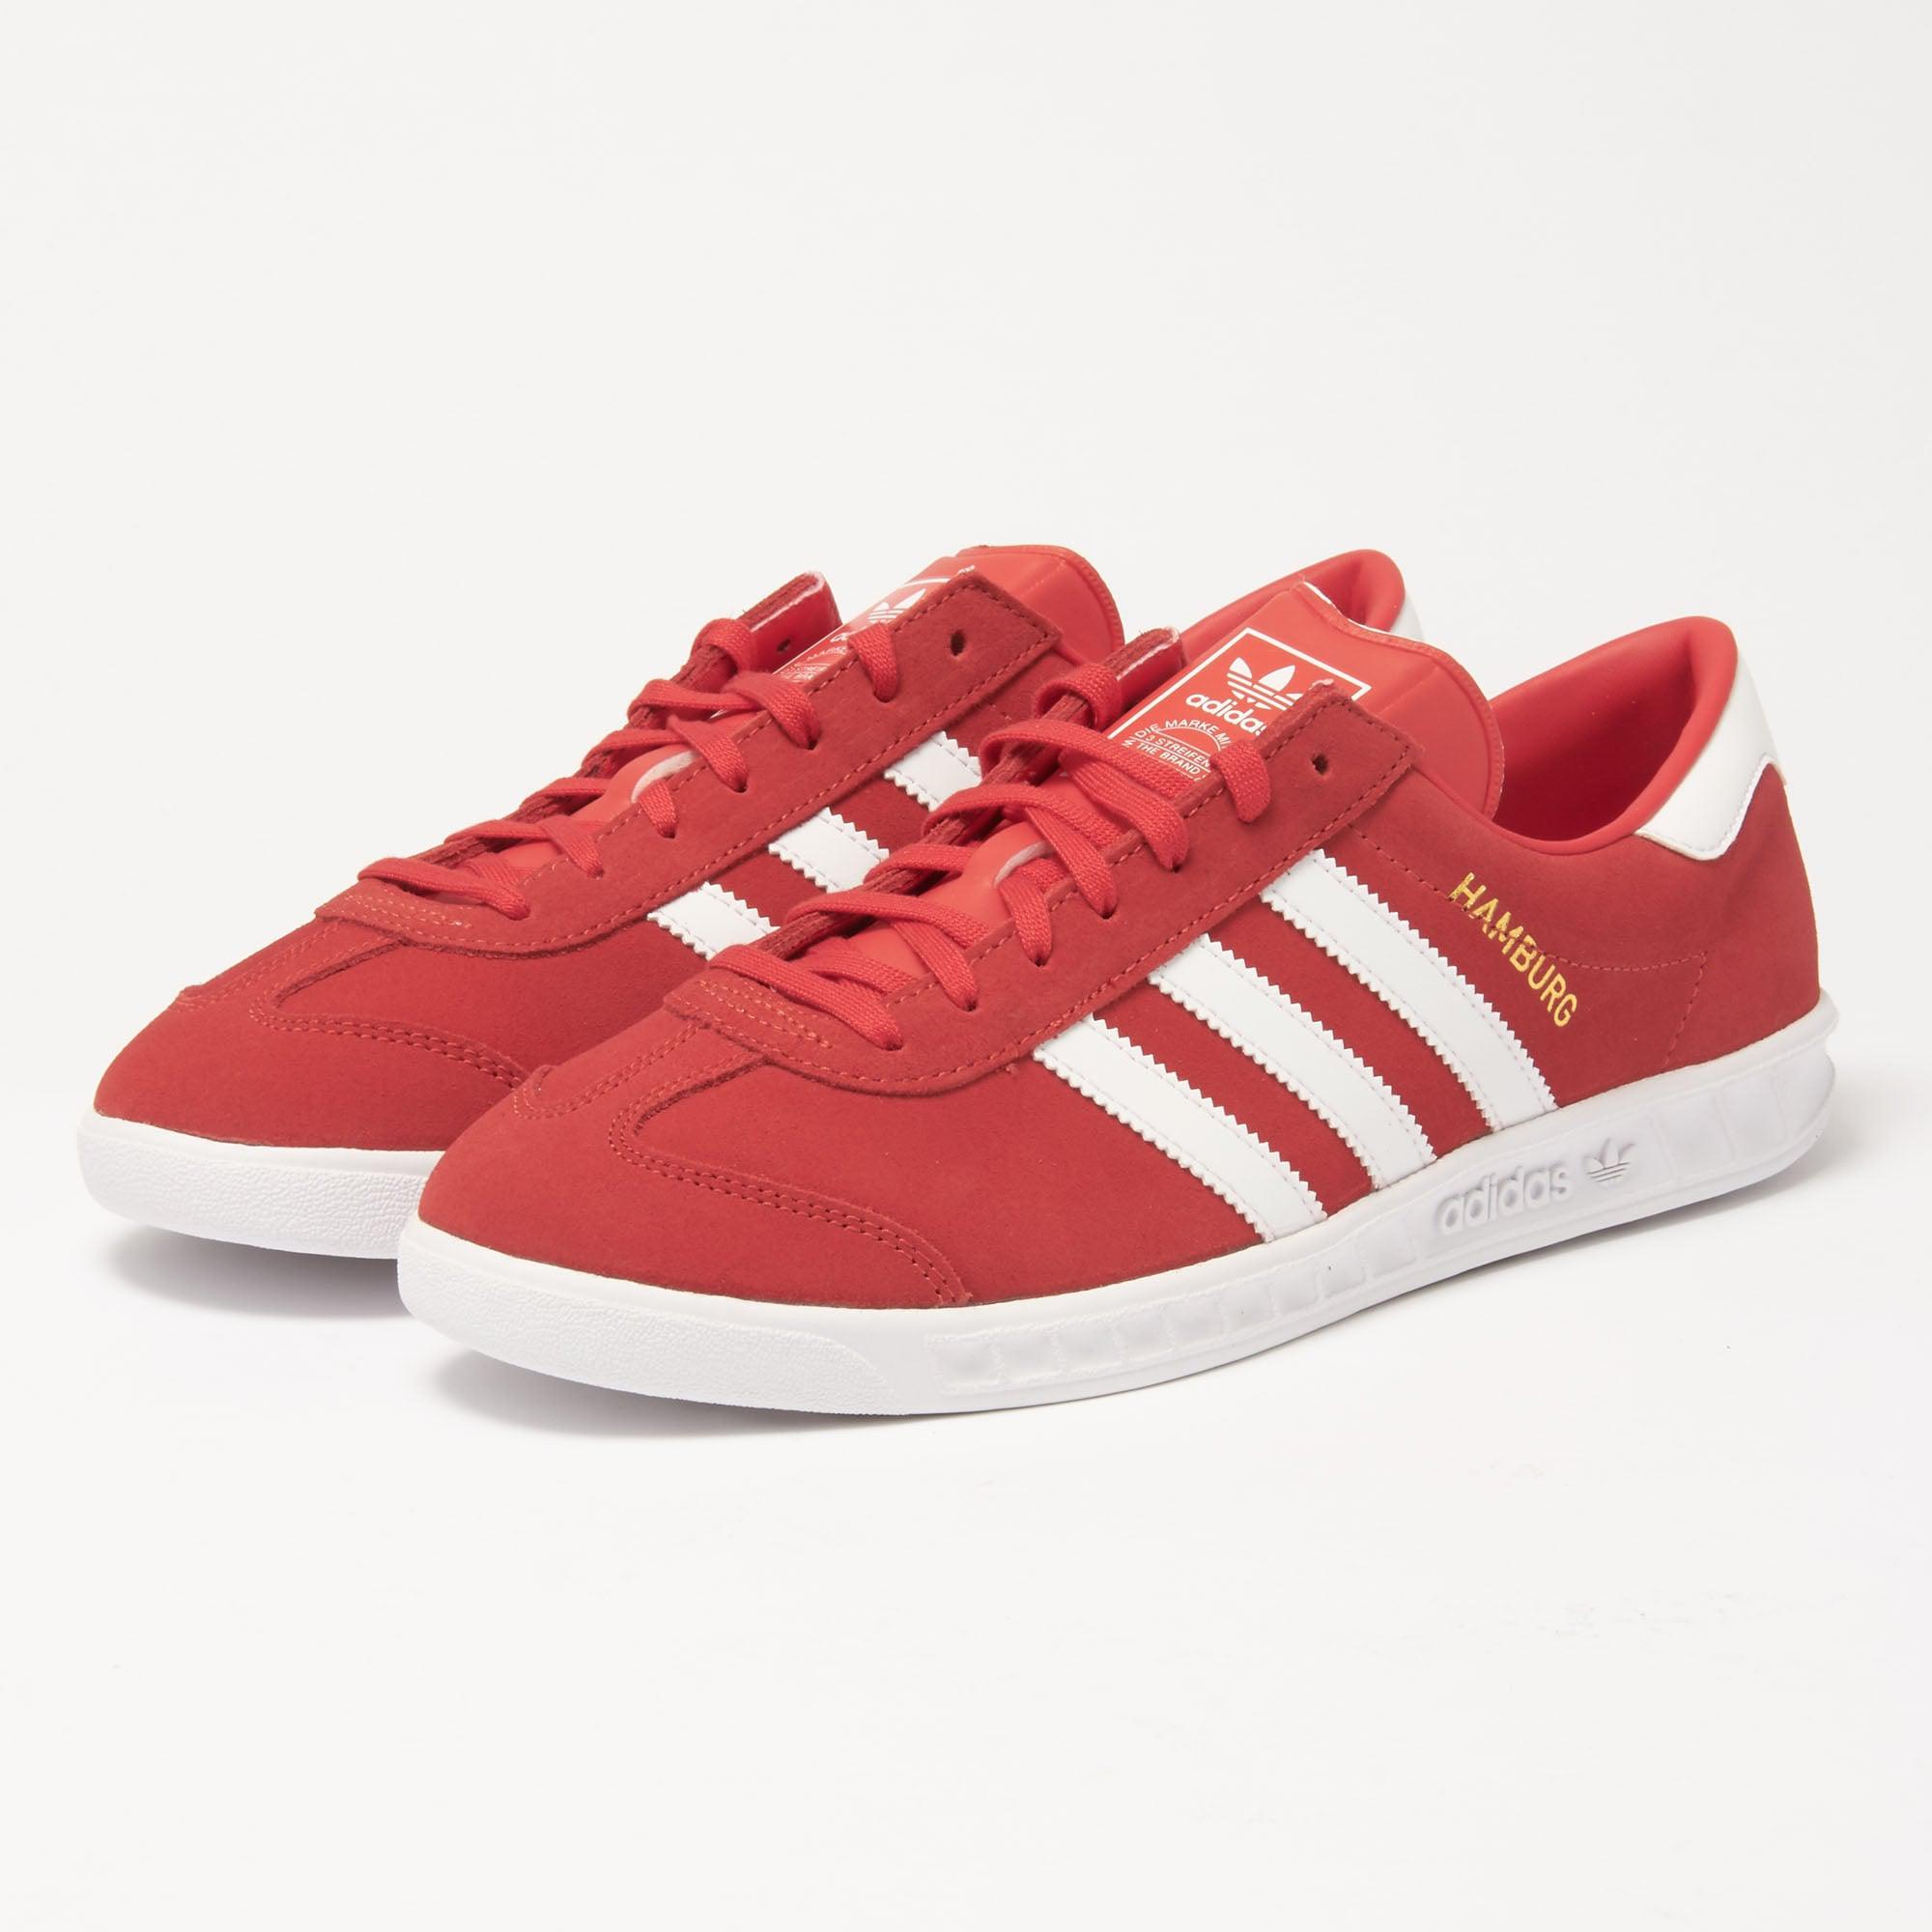 Lyst - Adidas Originals Adidas Hamburg Red Sneakers in Red for Men